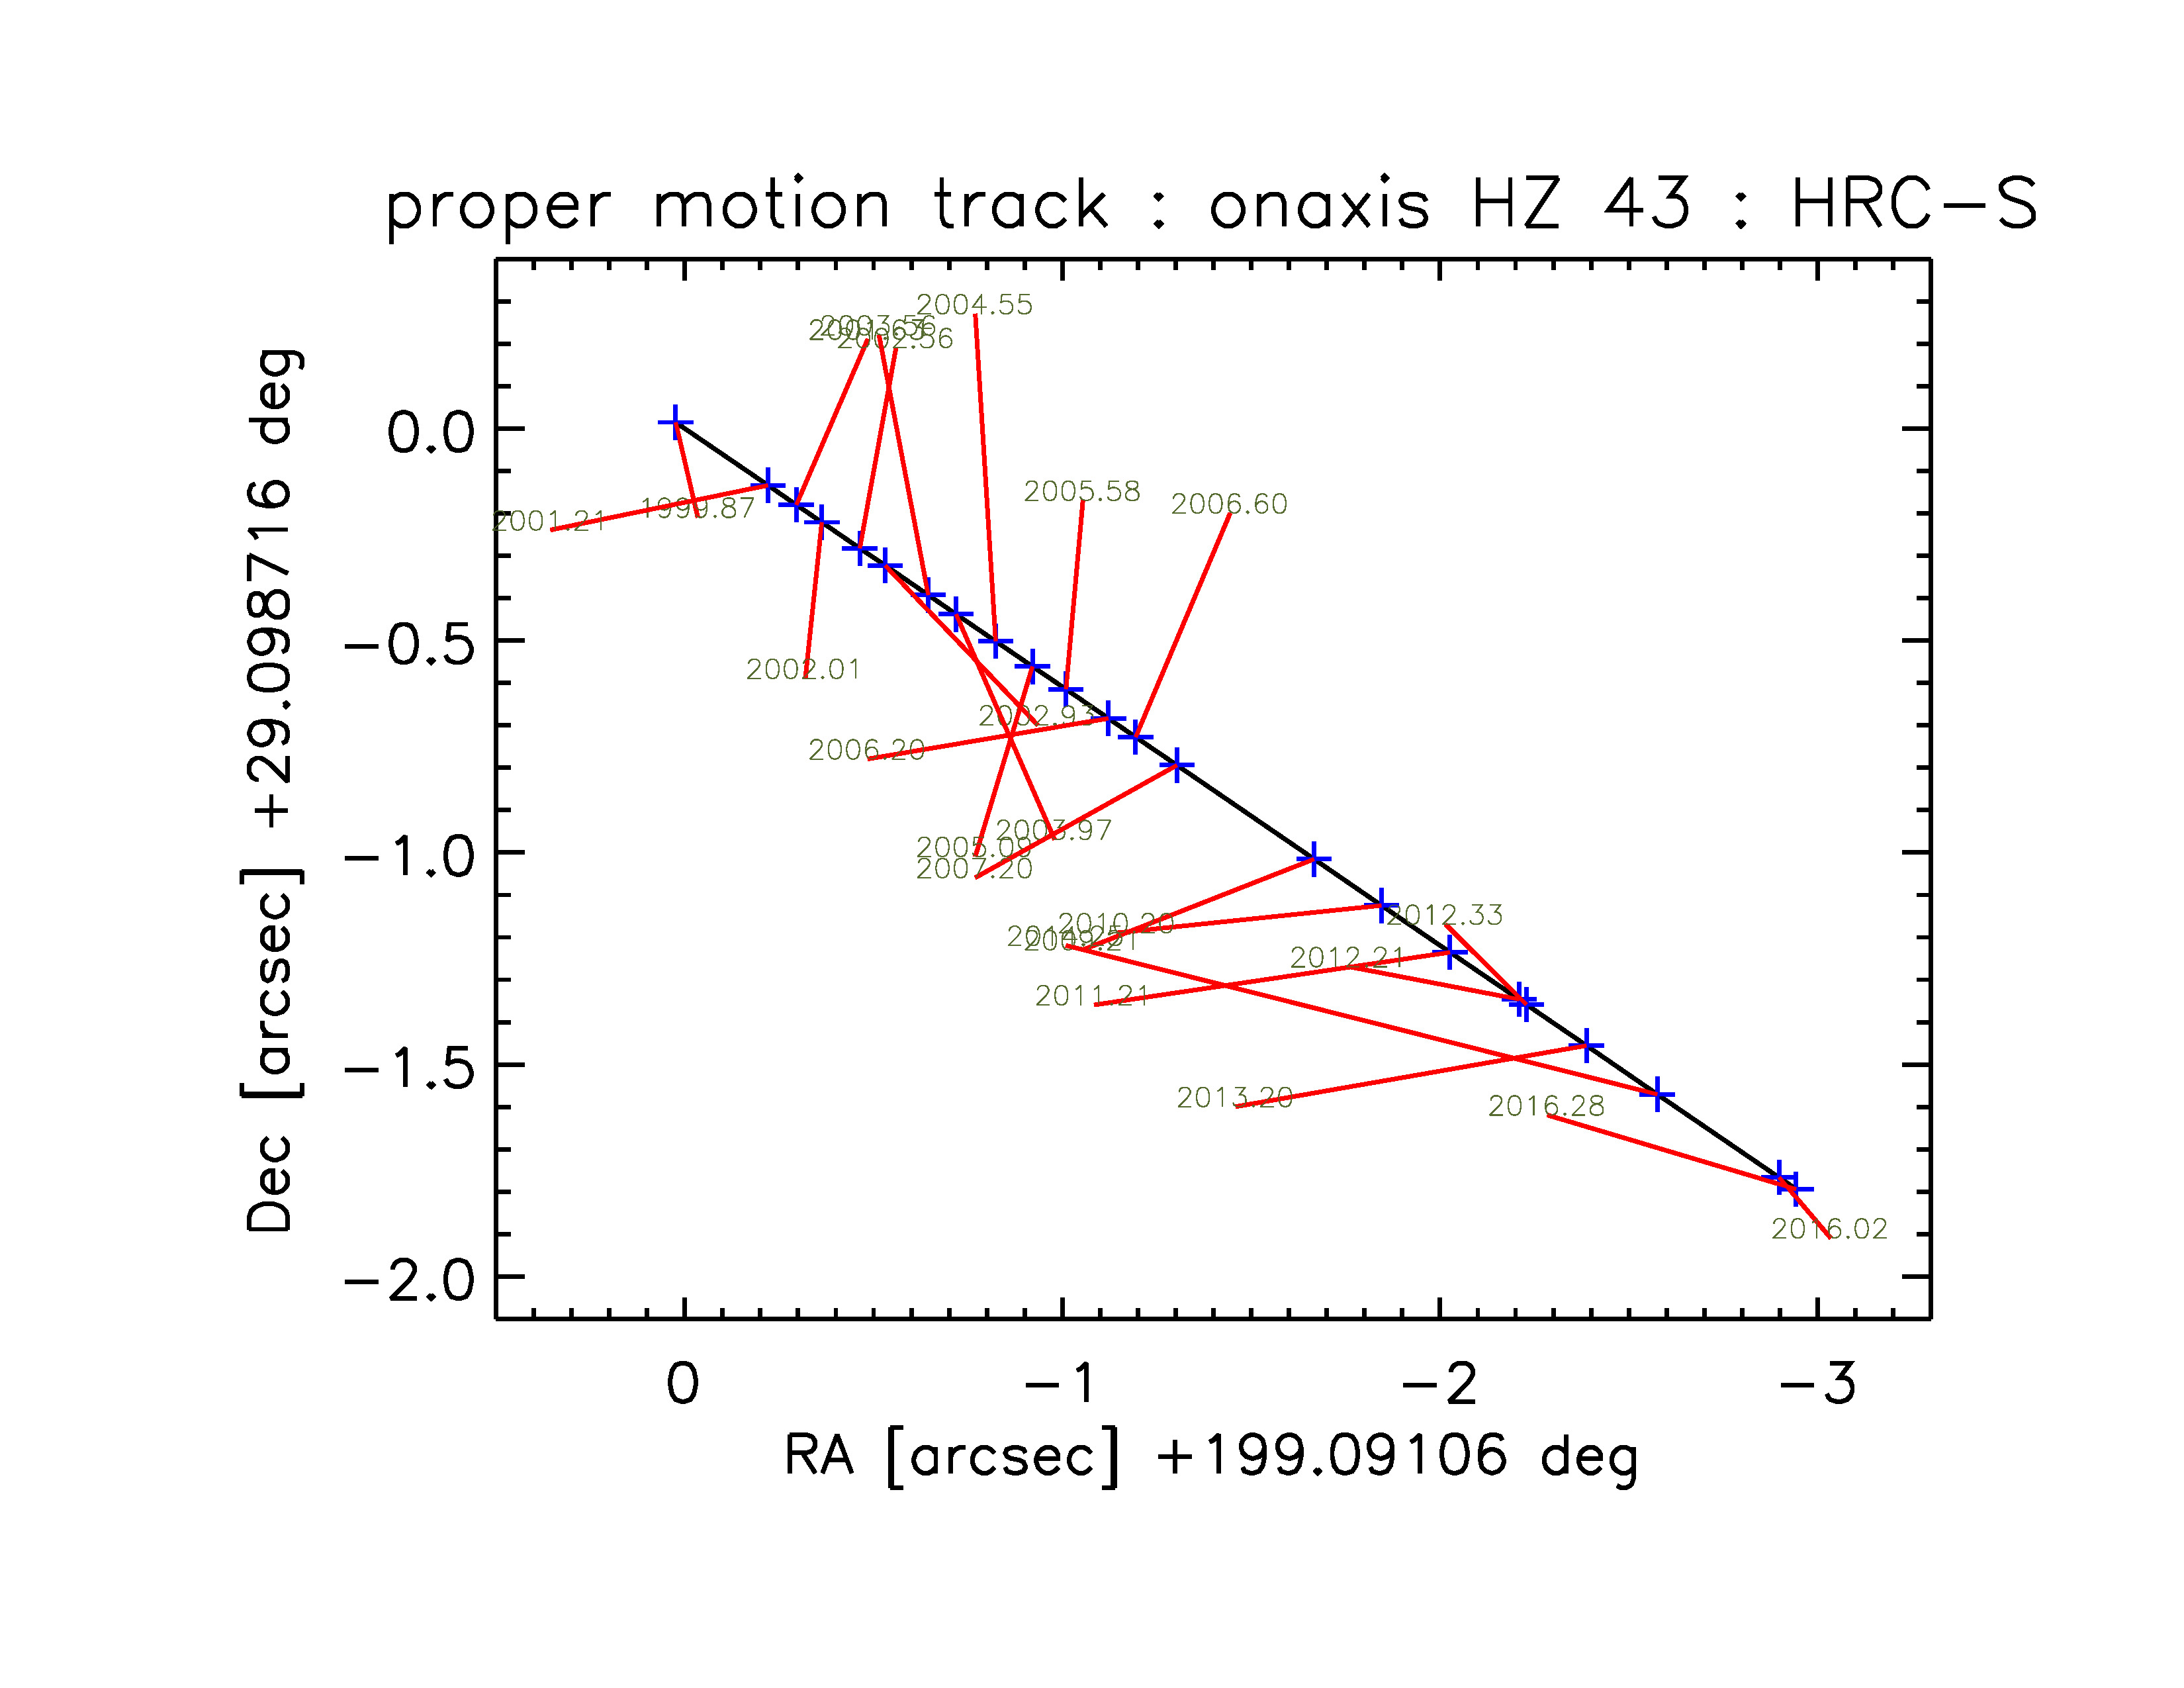 Track of HZ 43 observed with HRC-S